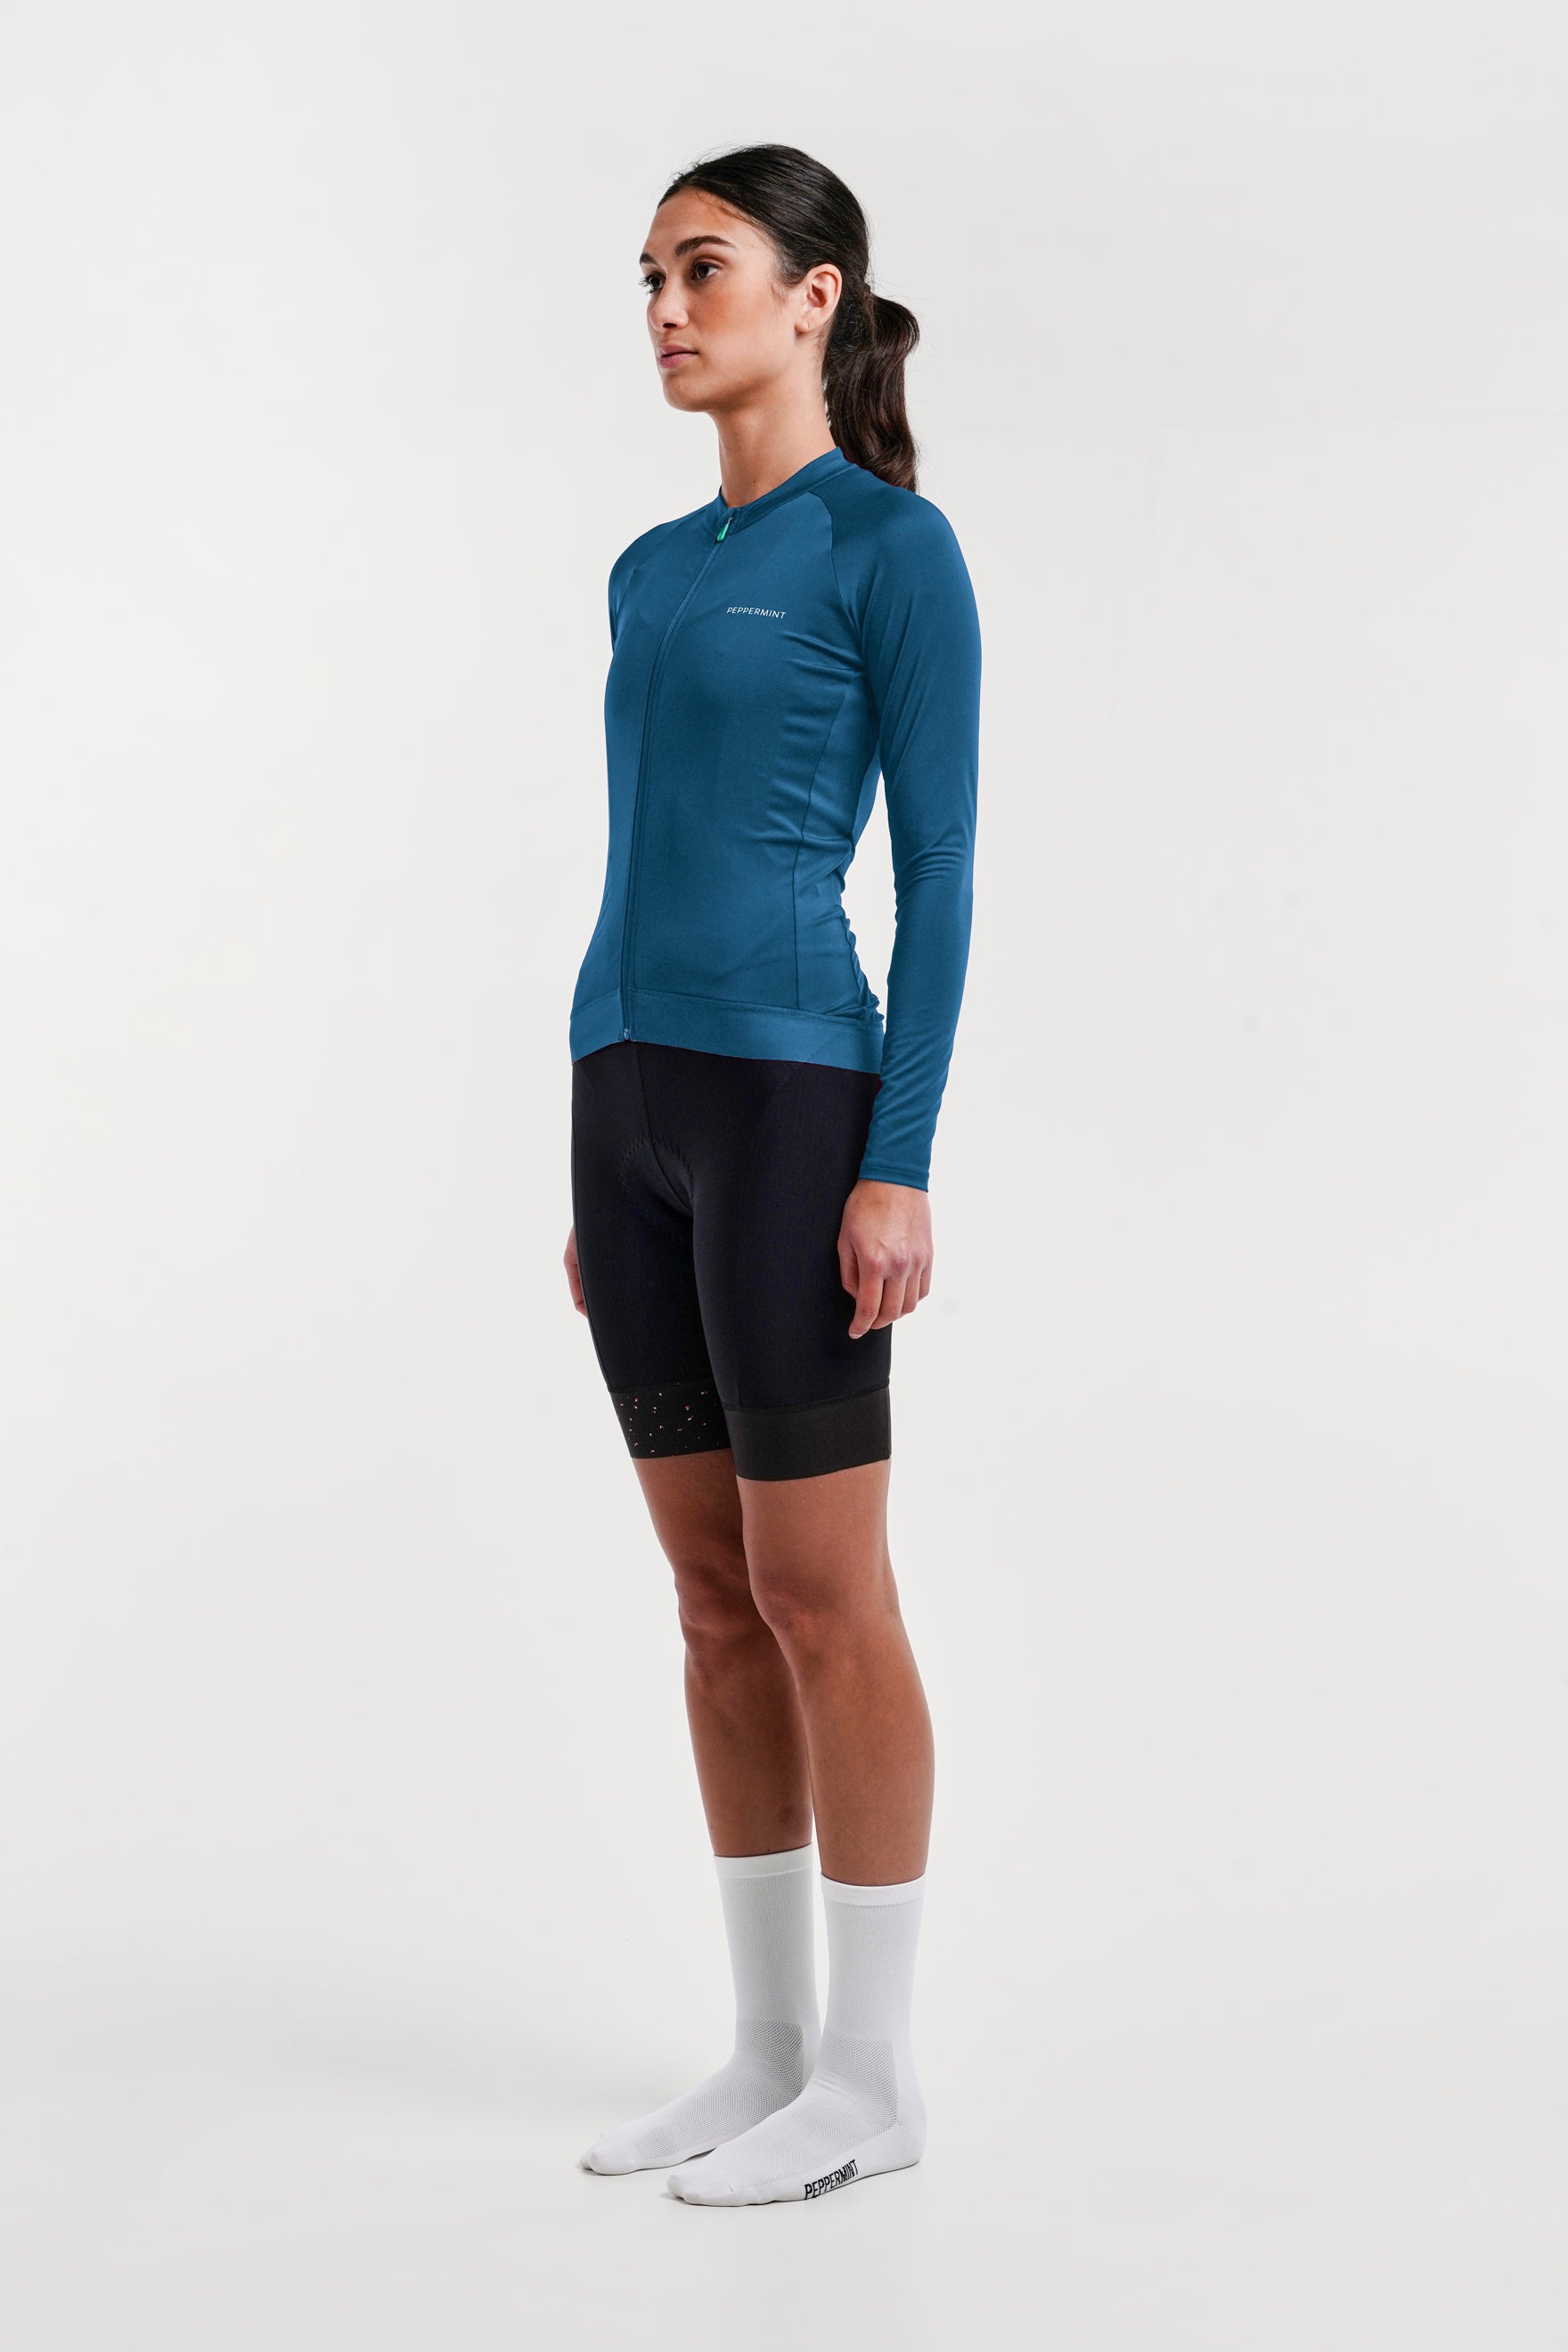 P.Cycled Signature Long-Sleeve Jersey